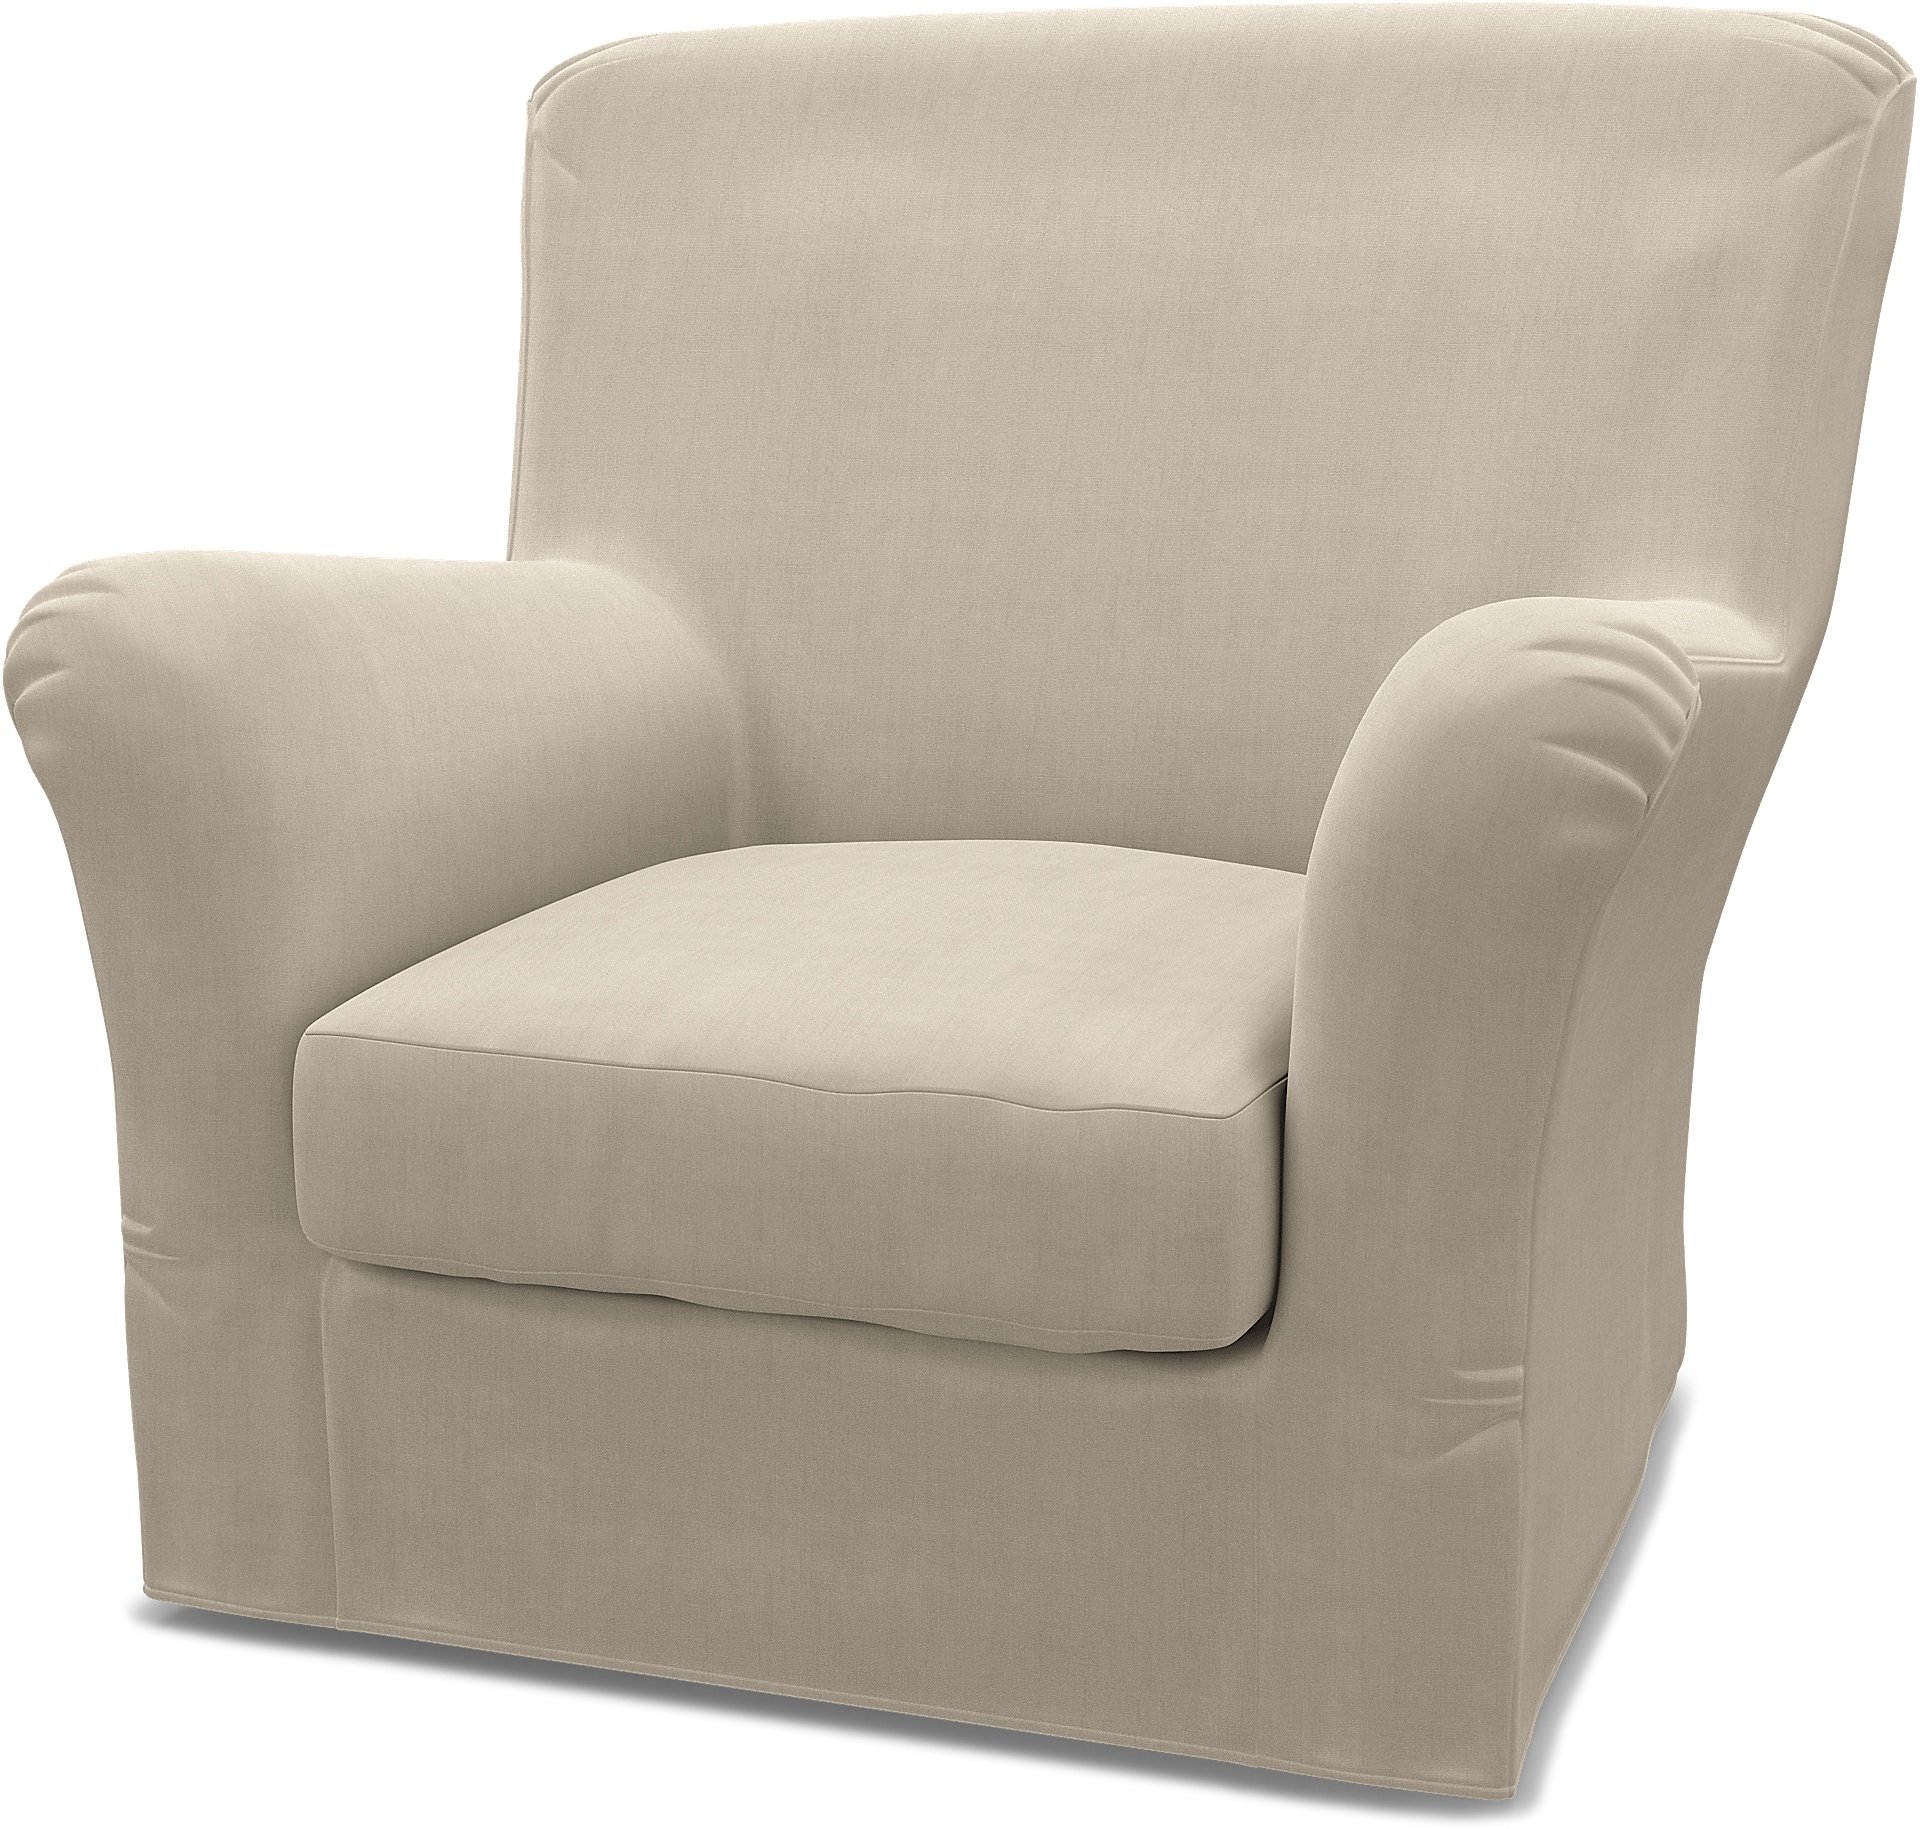 IKEA - Tomelilla High Back Armchair Cover (Small), Parchment, Linen - Bemz